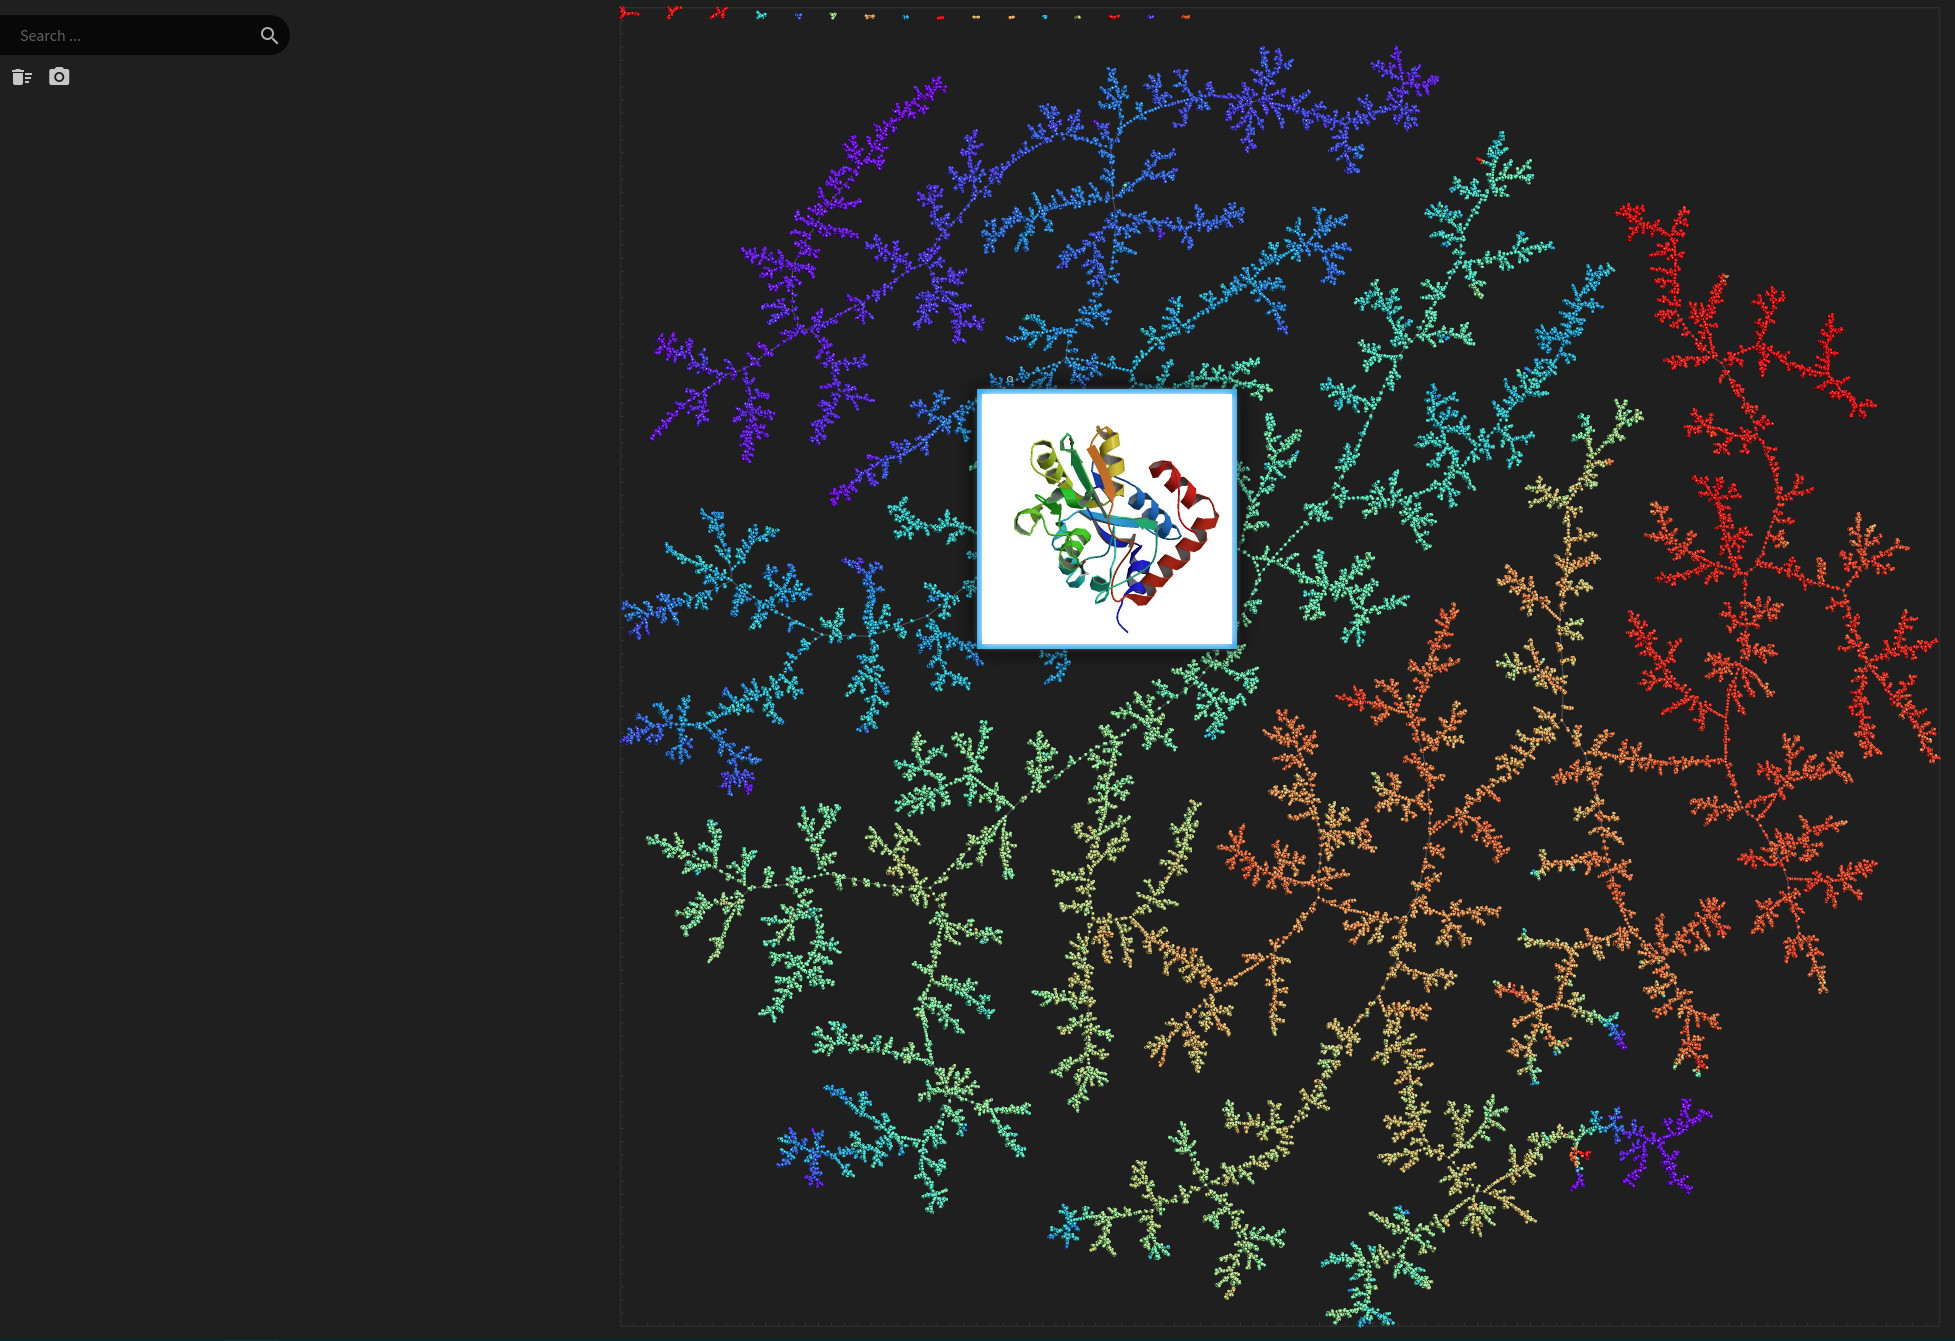 Protein DataBank proteins visualized as a graph / spanning tree using tmap.